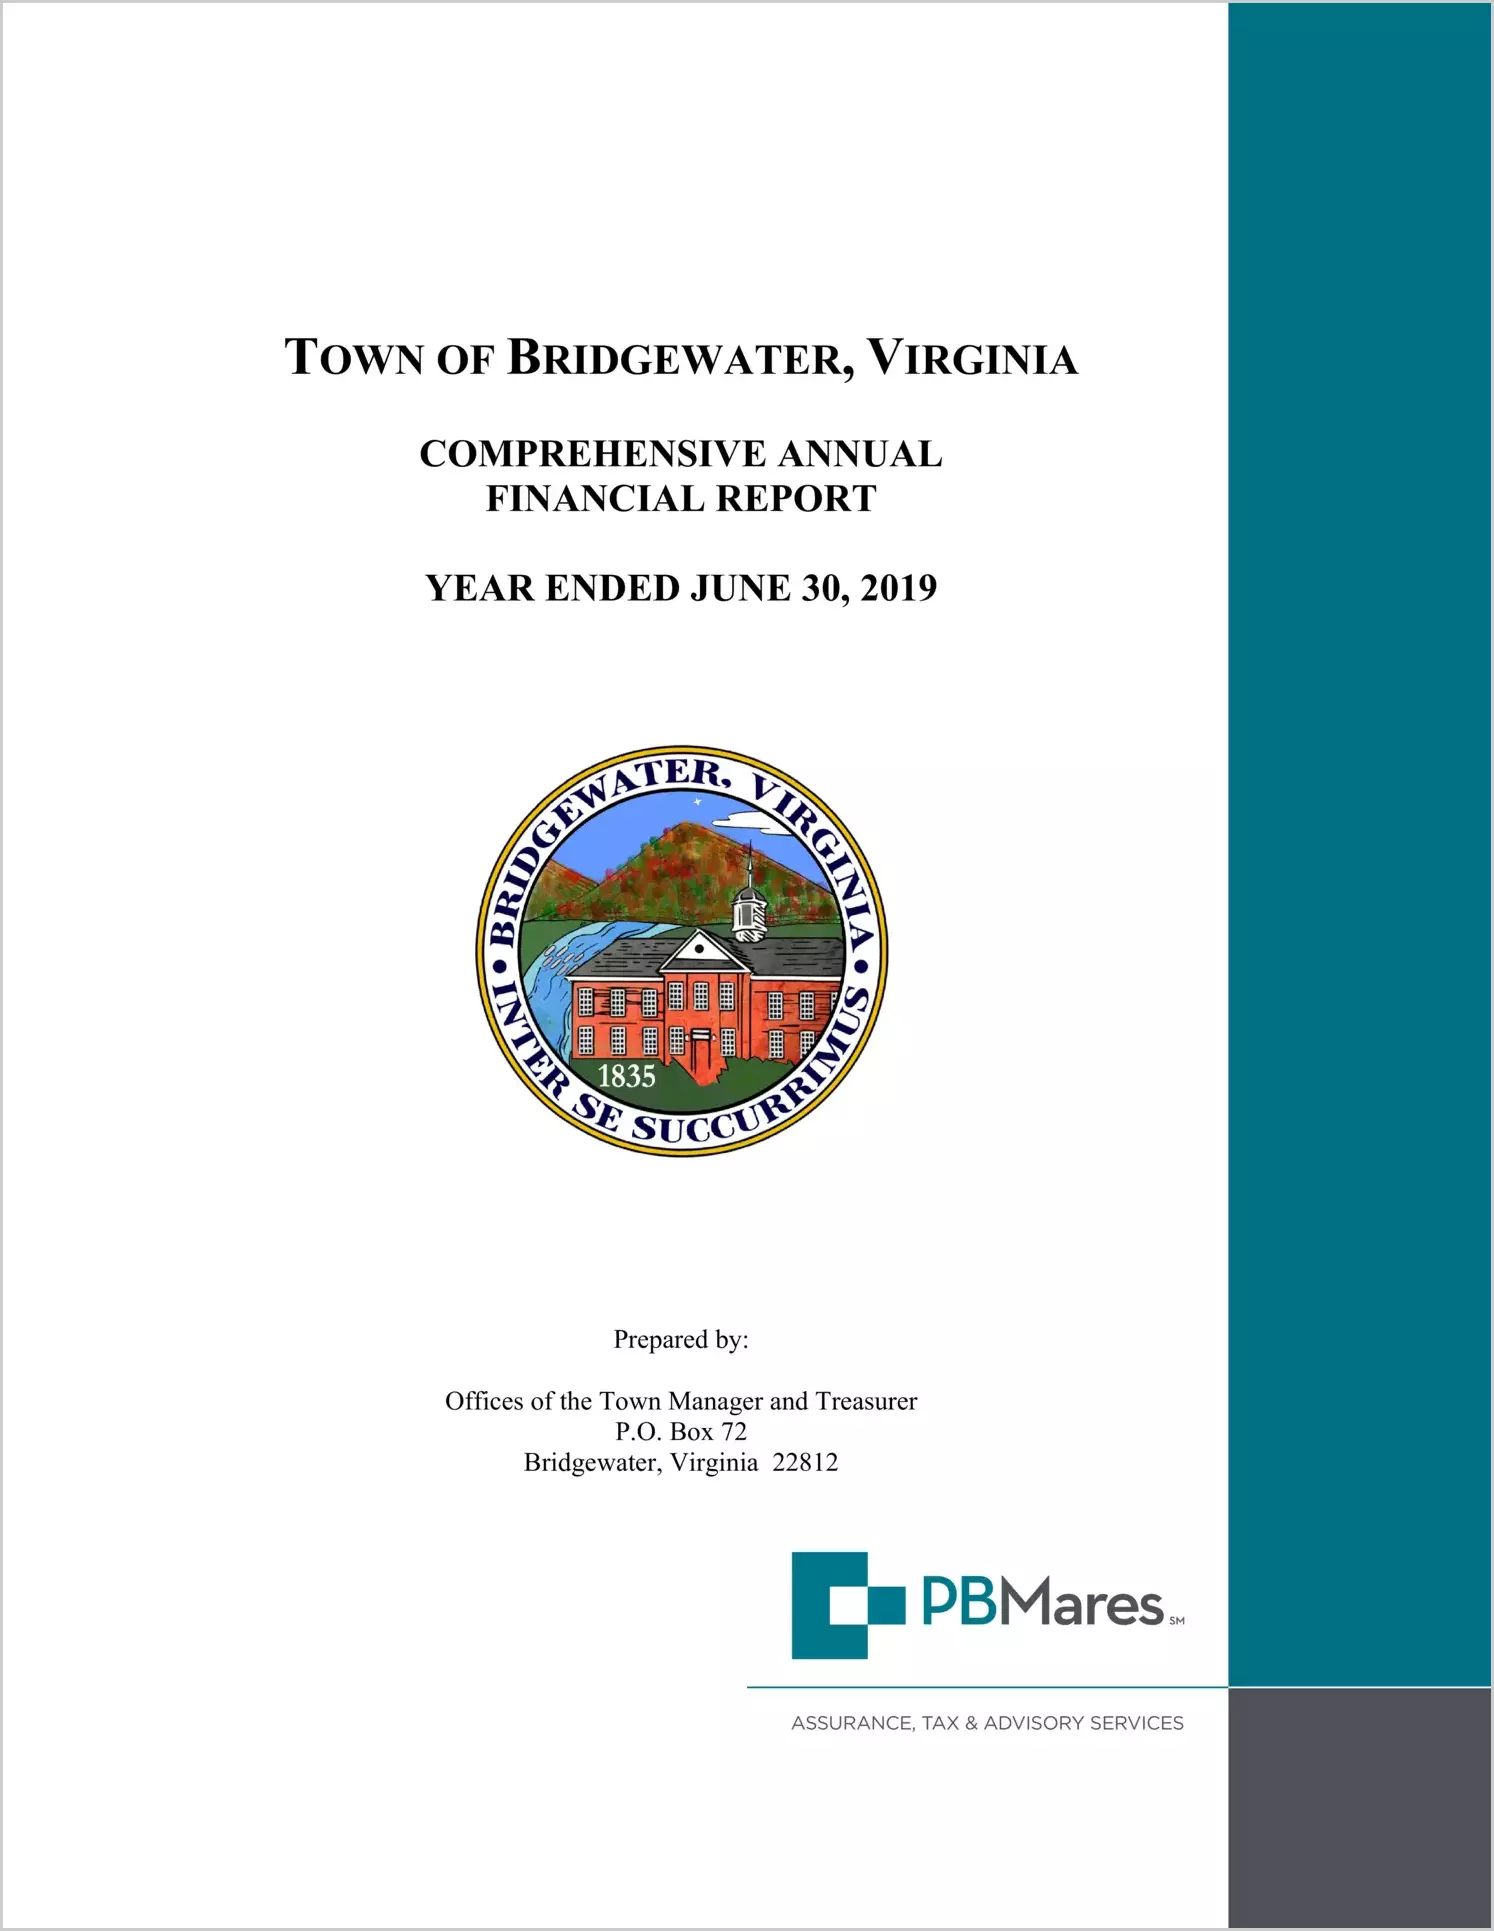 2019 Annual Financial Report for Town of Bridgewater